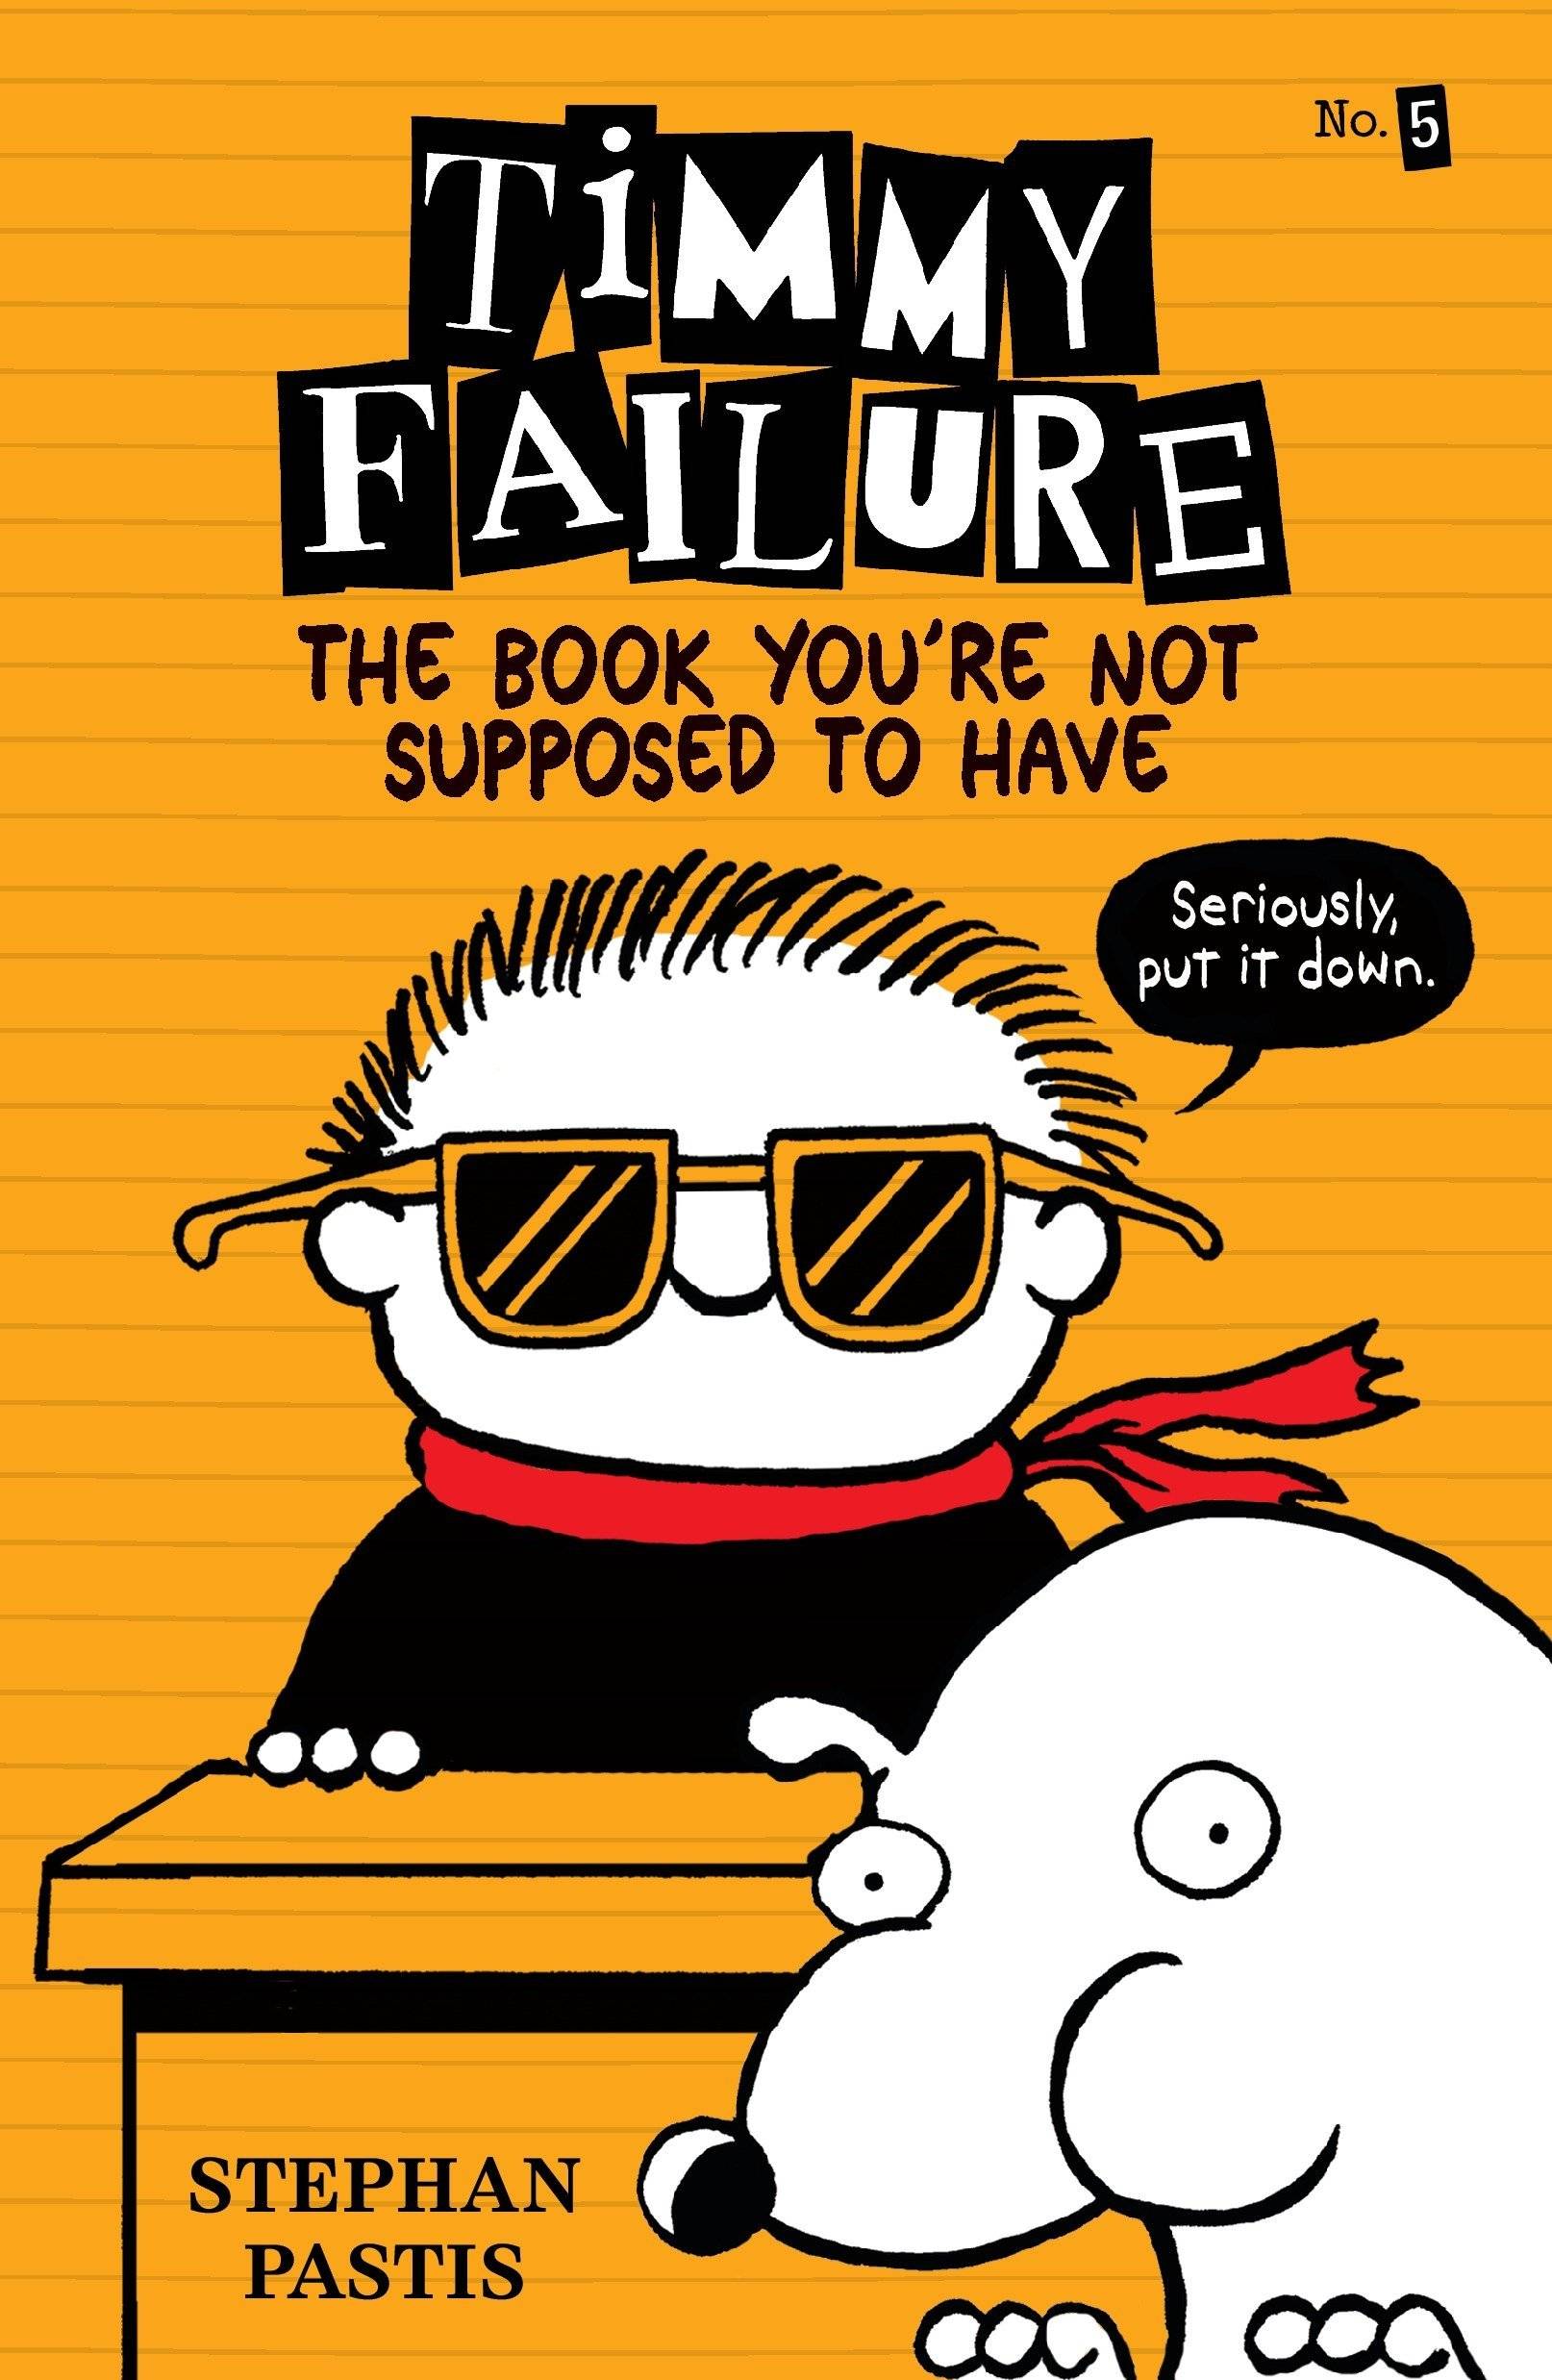 IMG : Timmy Failure The Book you're not supposed to have#5